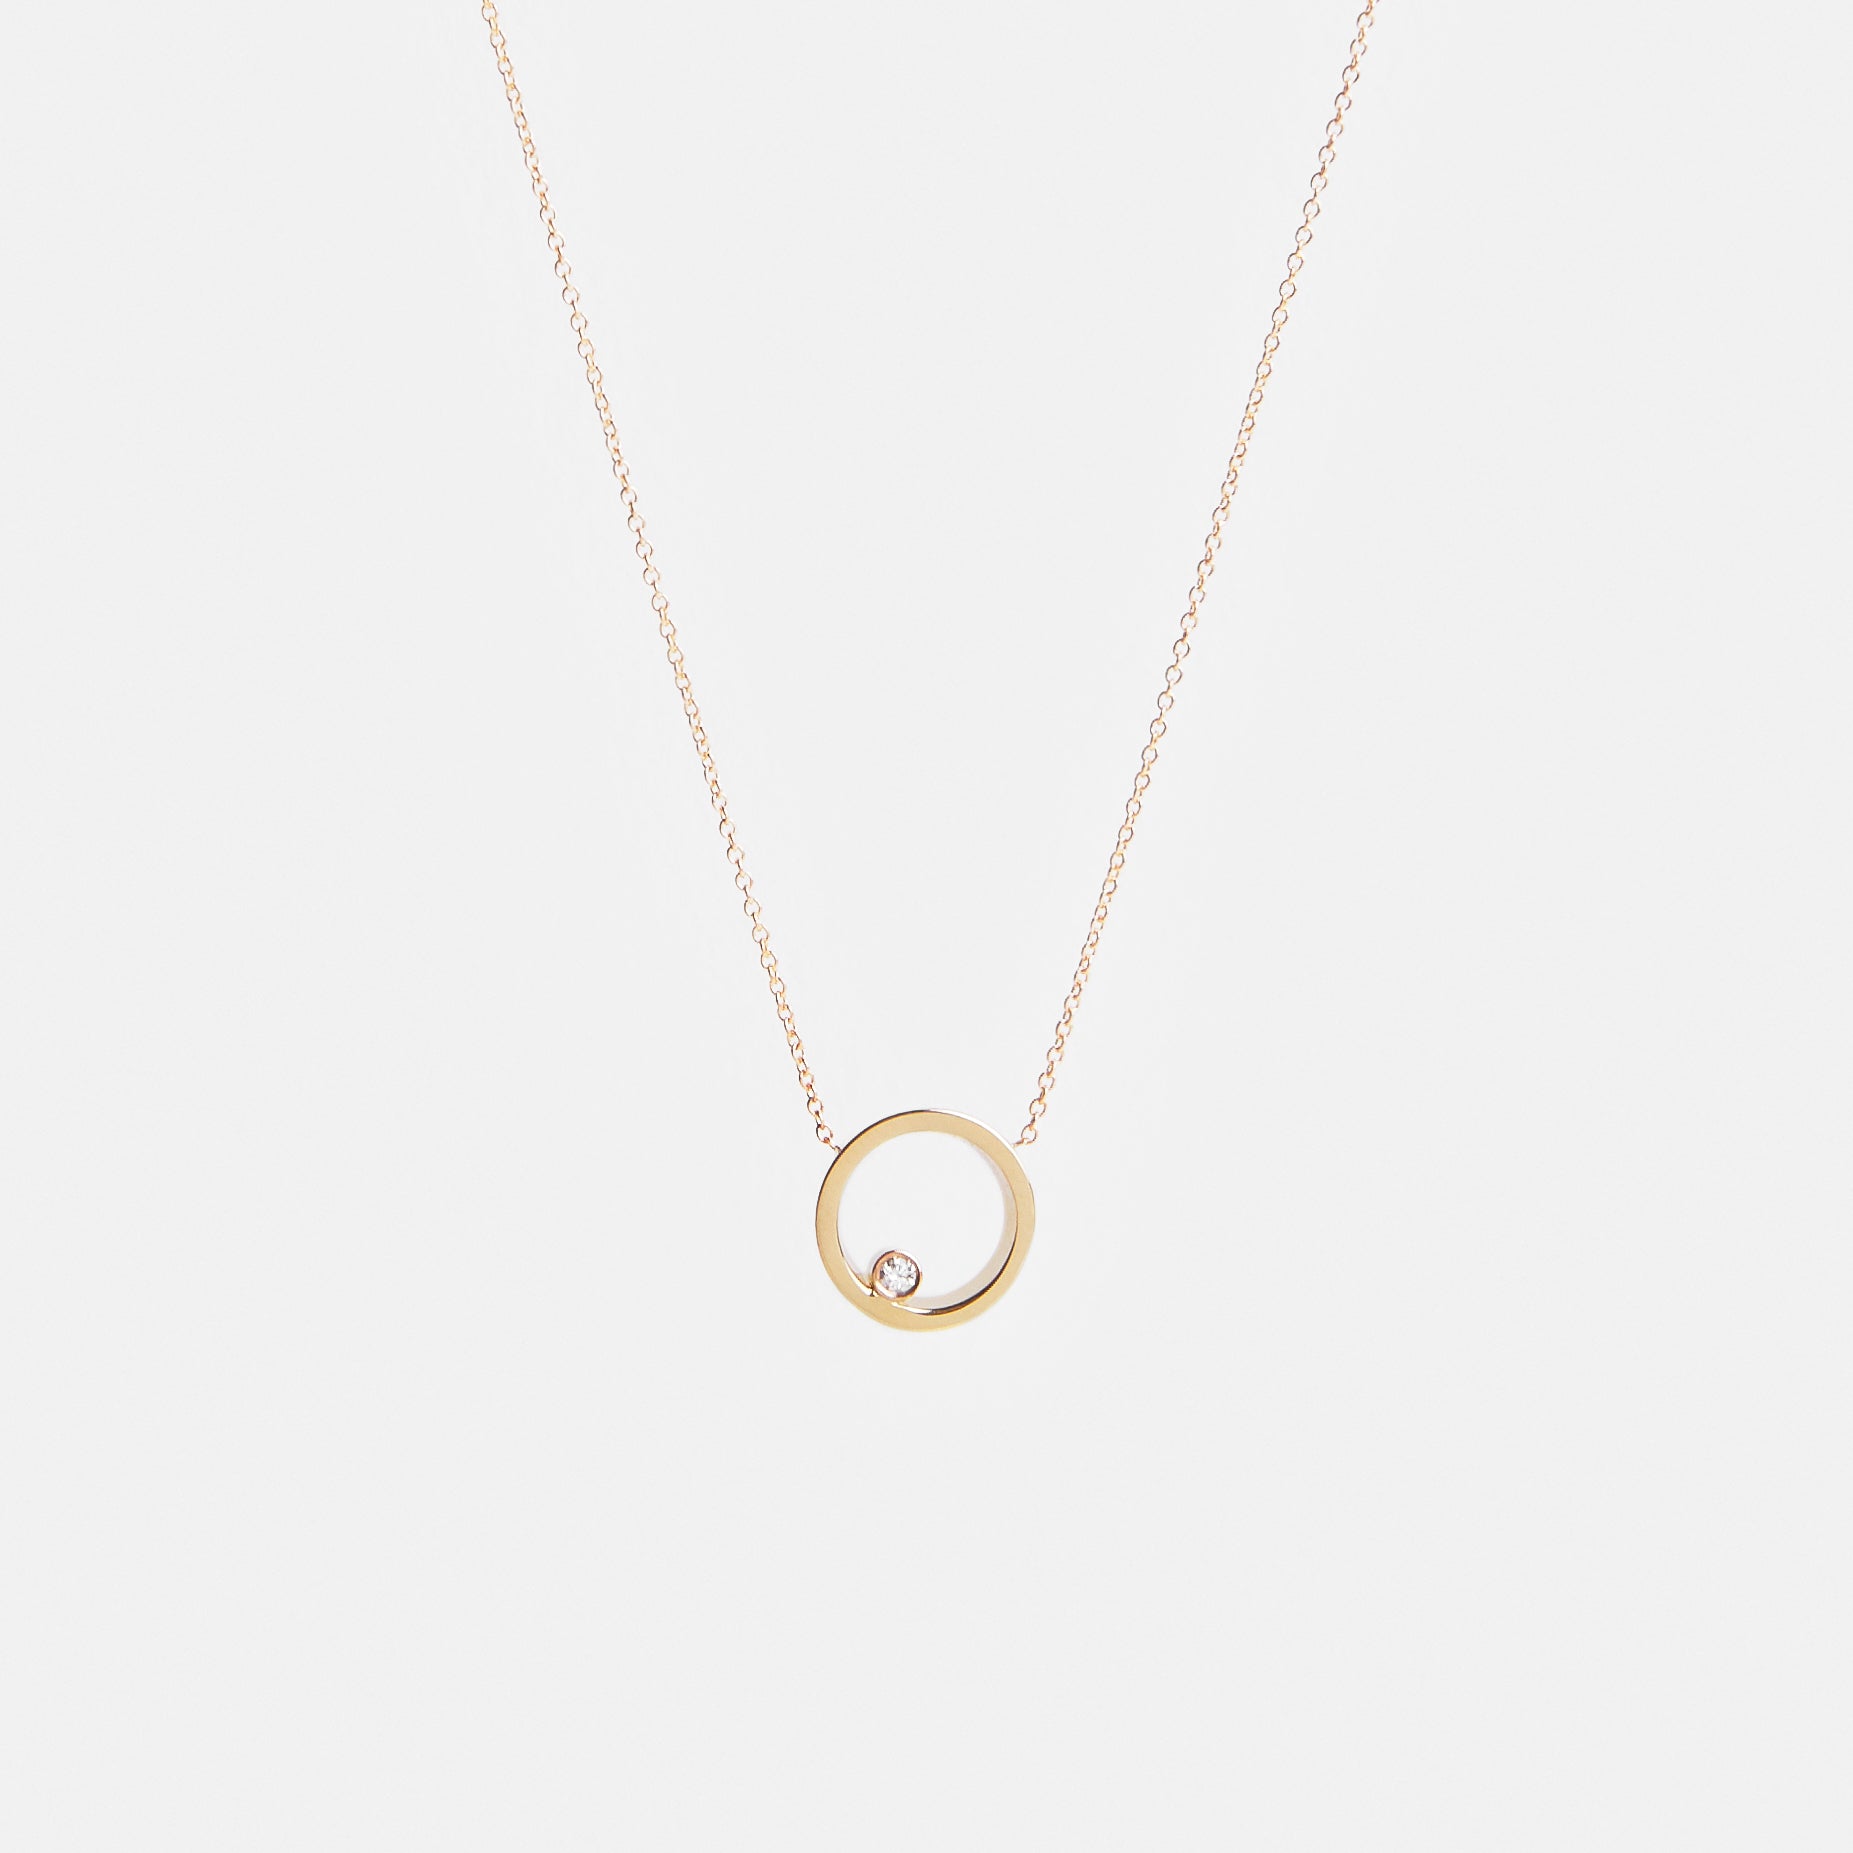 Ila Designer Necklace in 14k Gold set with White Diamond By SHW Fine Jewelry NYC